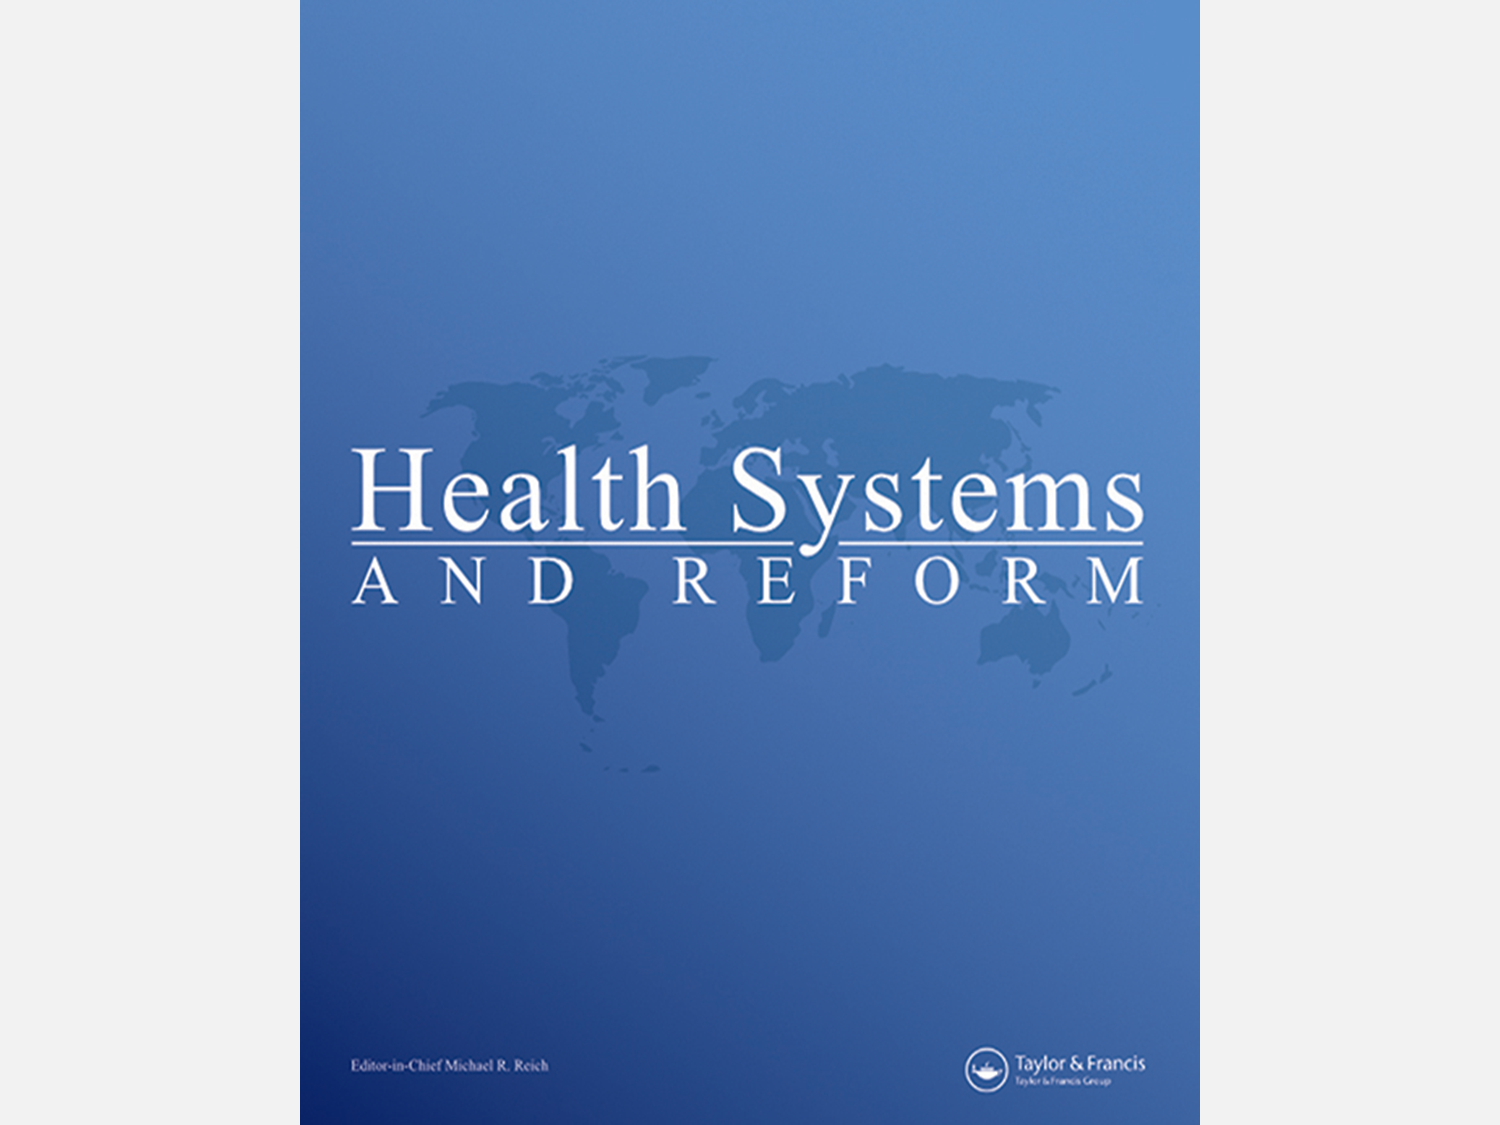 [Research Paper] “Rethinking Japan’s Health System Sustainability Under the Planetary Health Framework” Published in Health Systems & Reform (November 21, 2023)